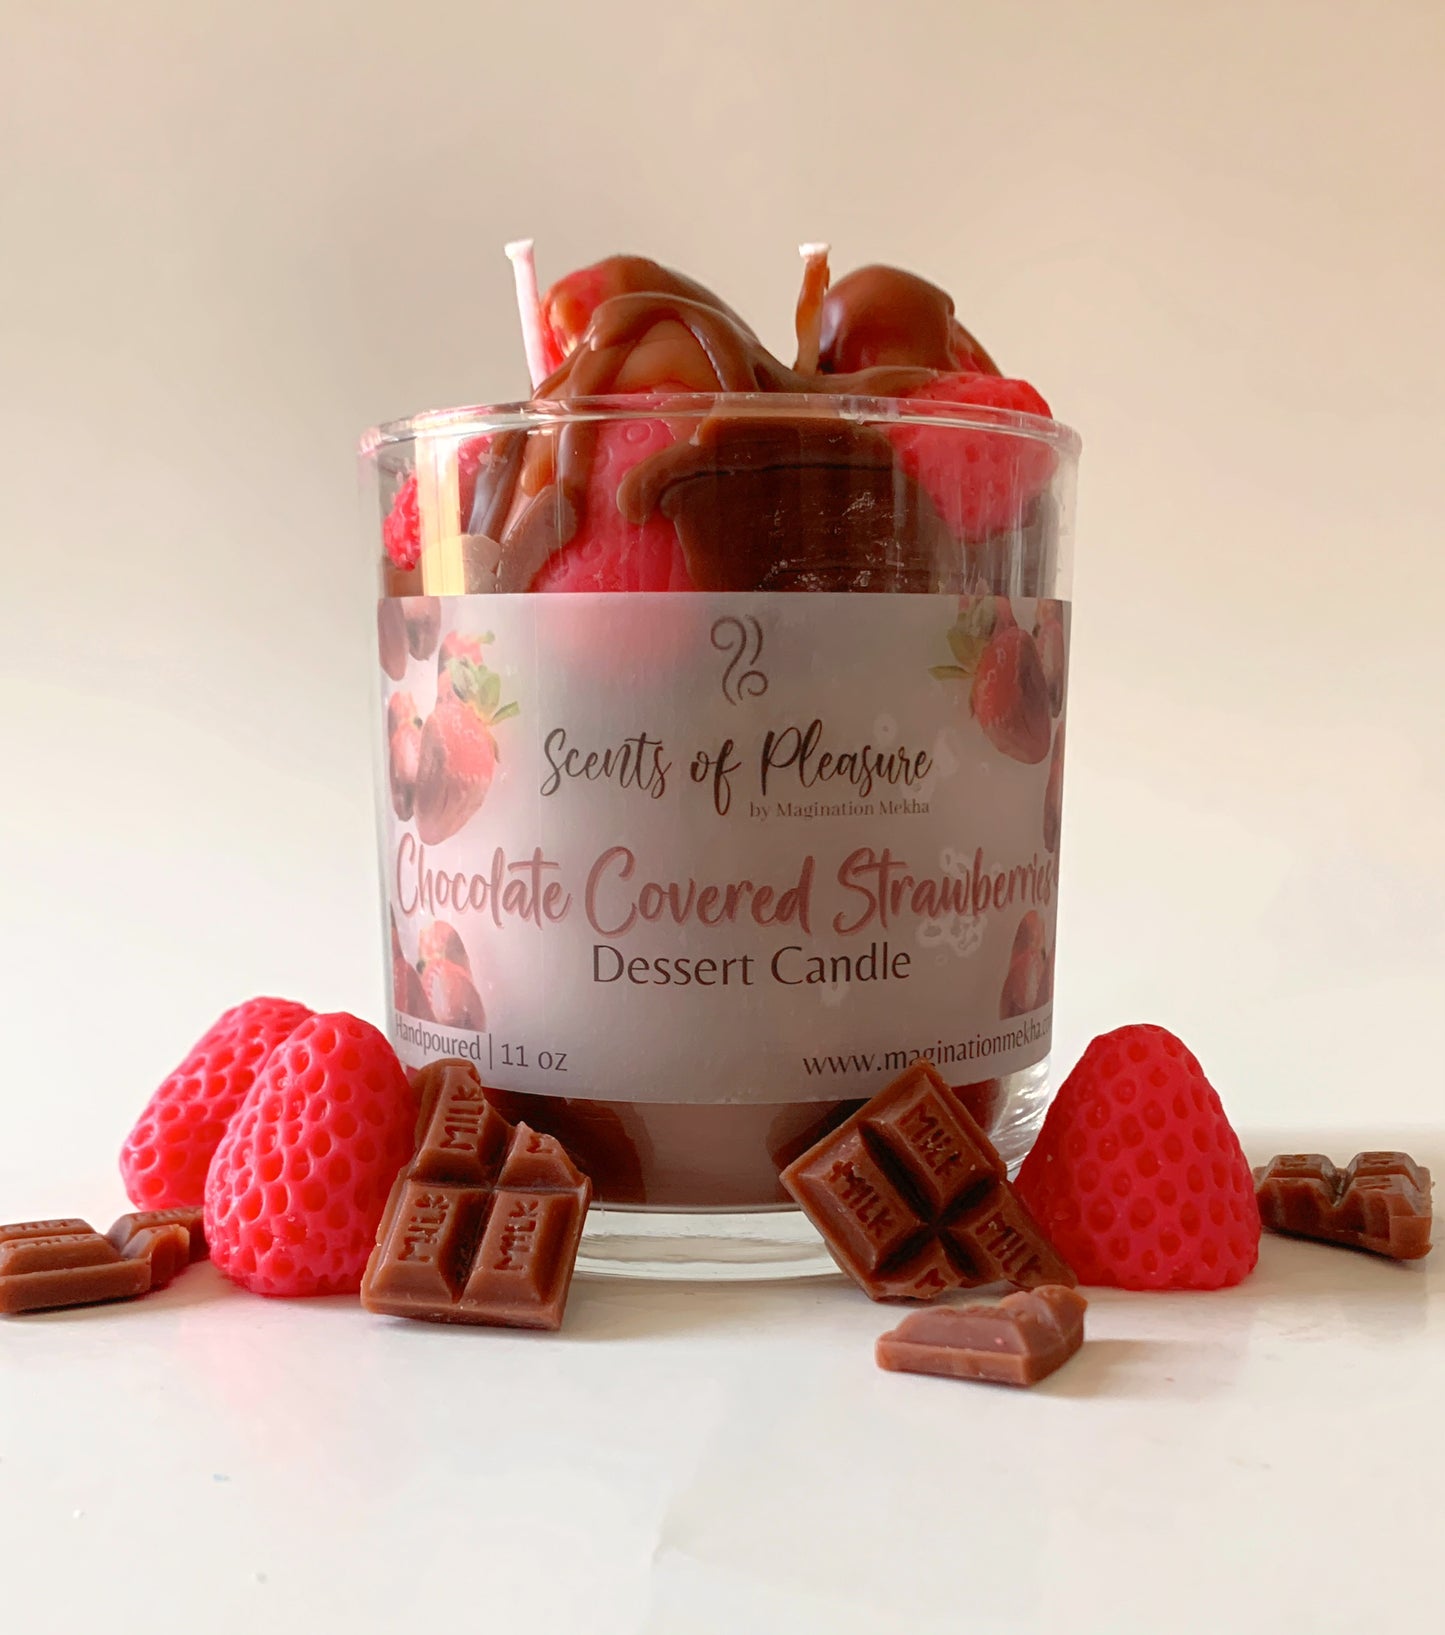 Chocolate Covered Strawberries Dessert Candle